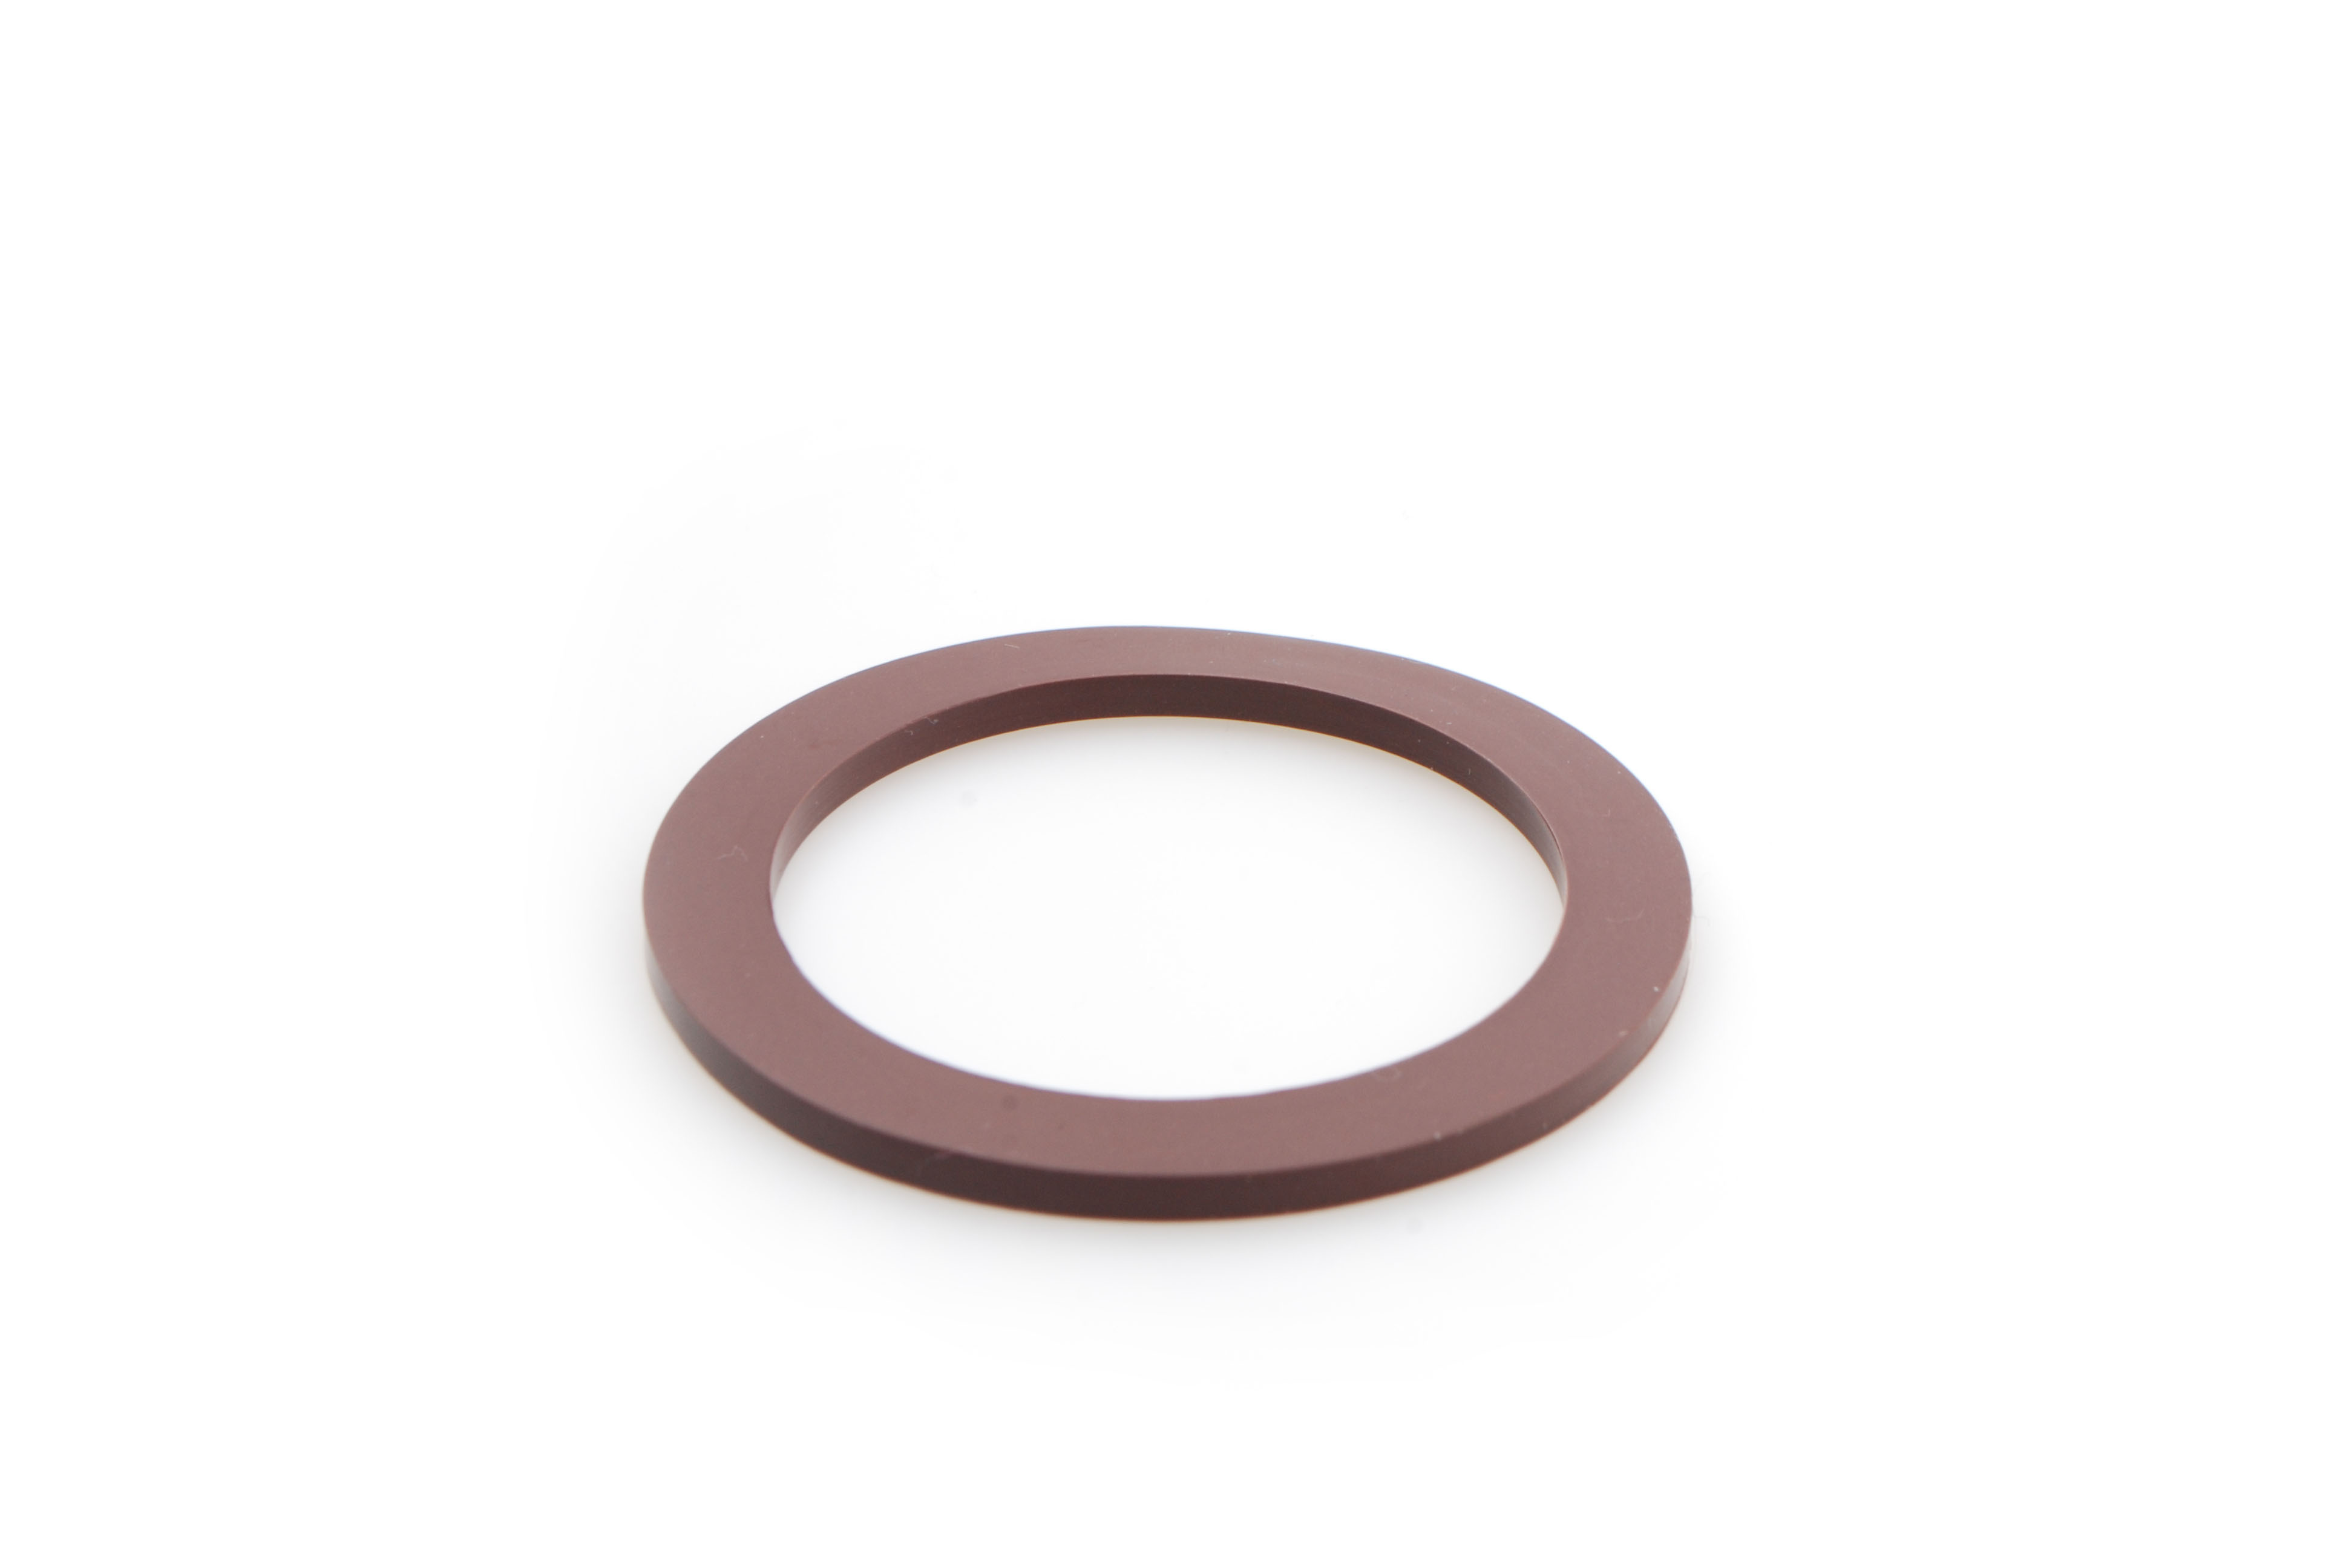 Alessi Rubberring voor ARS09-PL01-A9095-MG26 /3